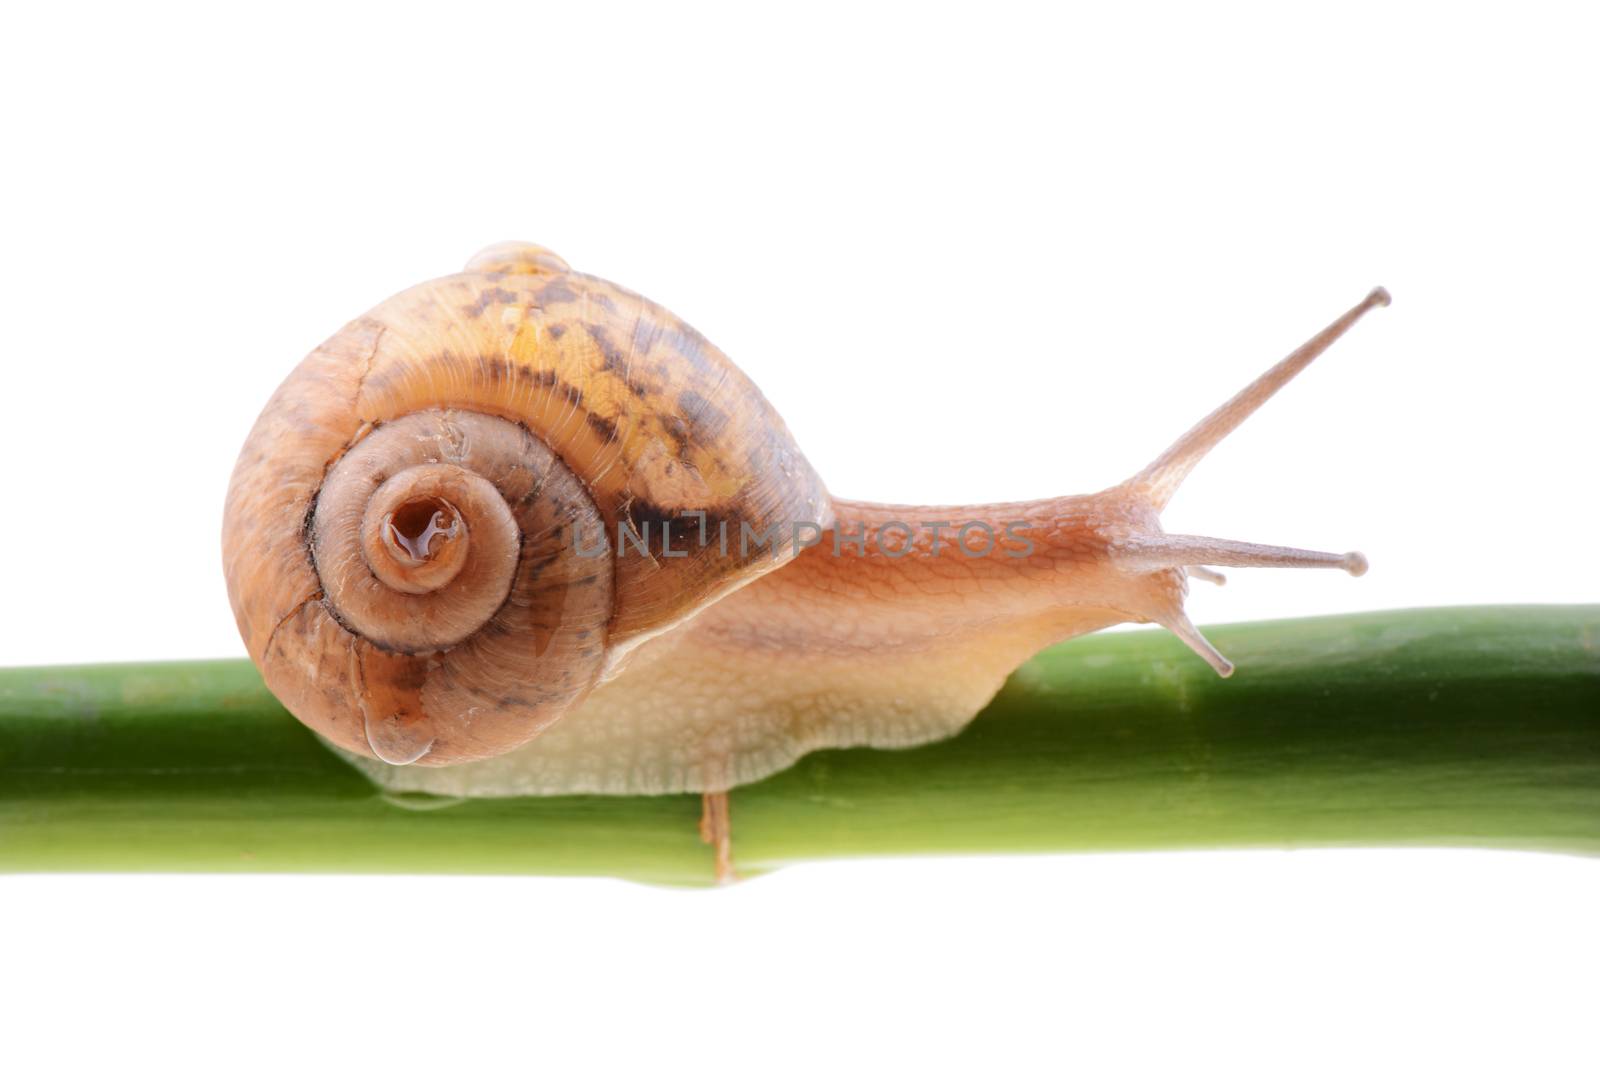 Snail on a green bamboo stem by bbbar